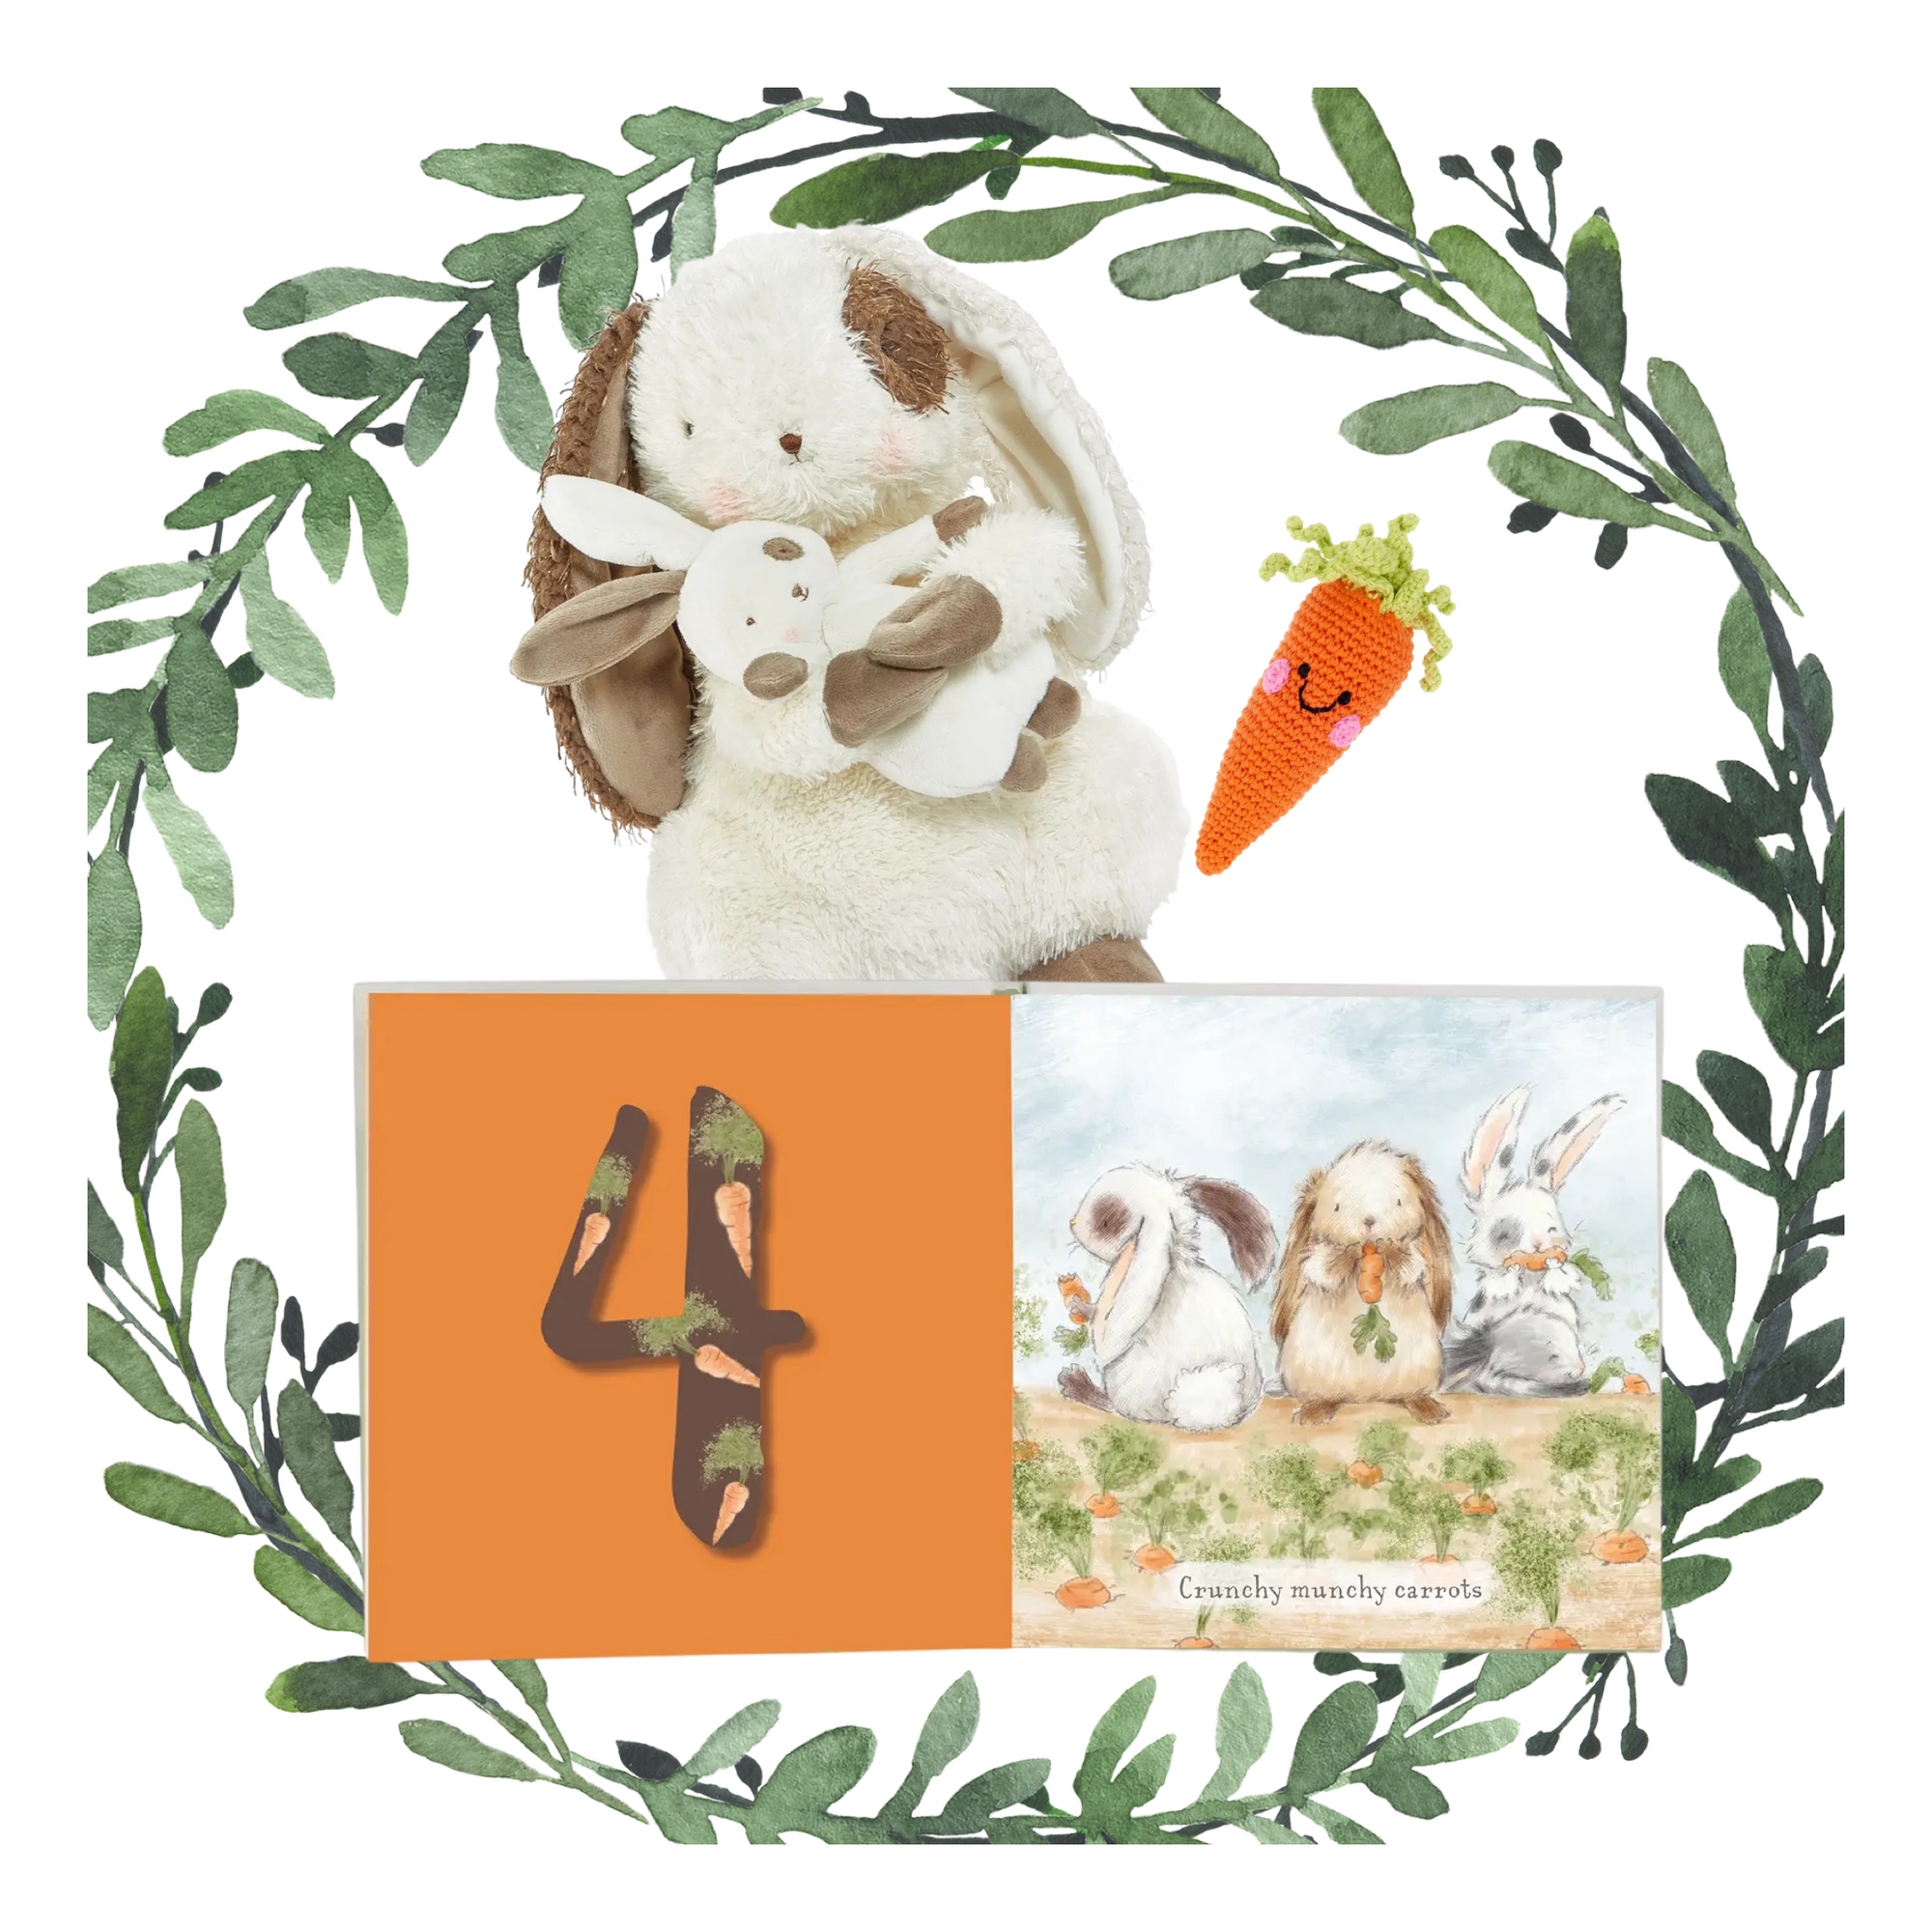 Hares Play-A Counting Board Book